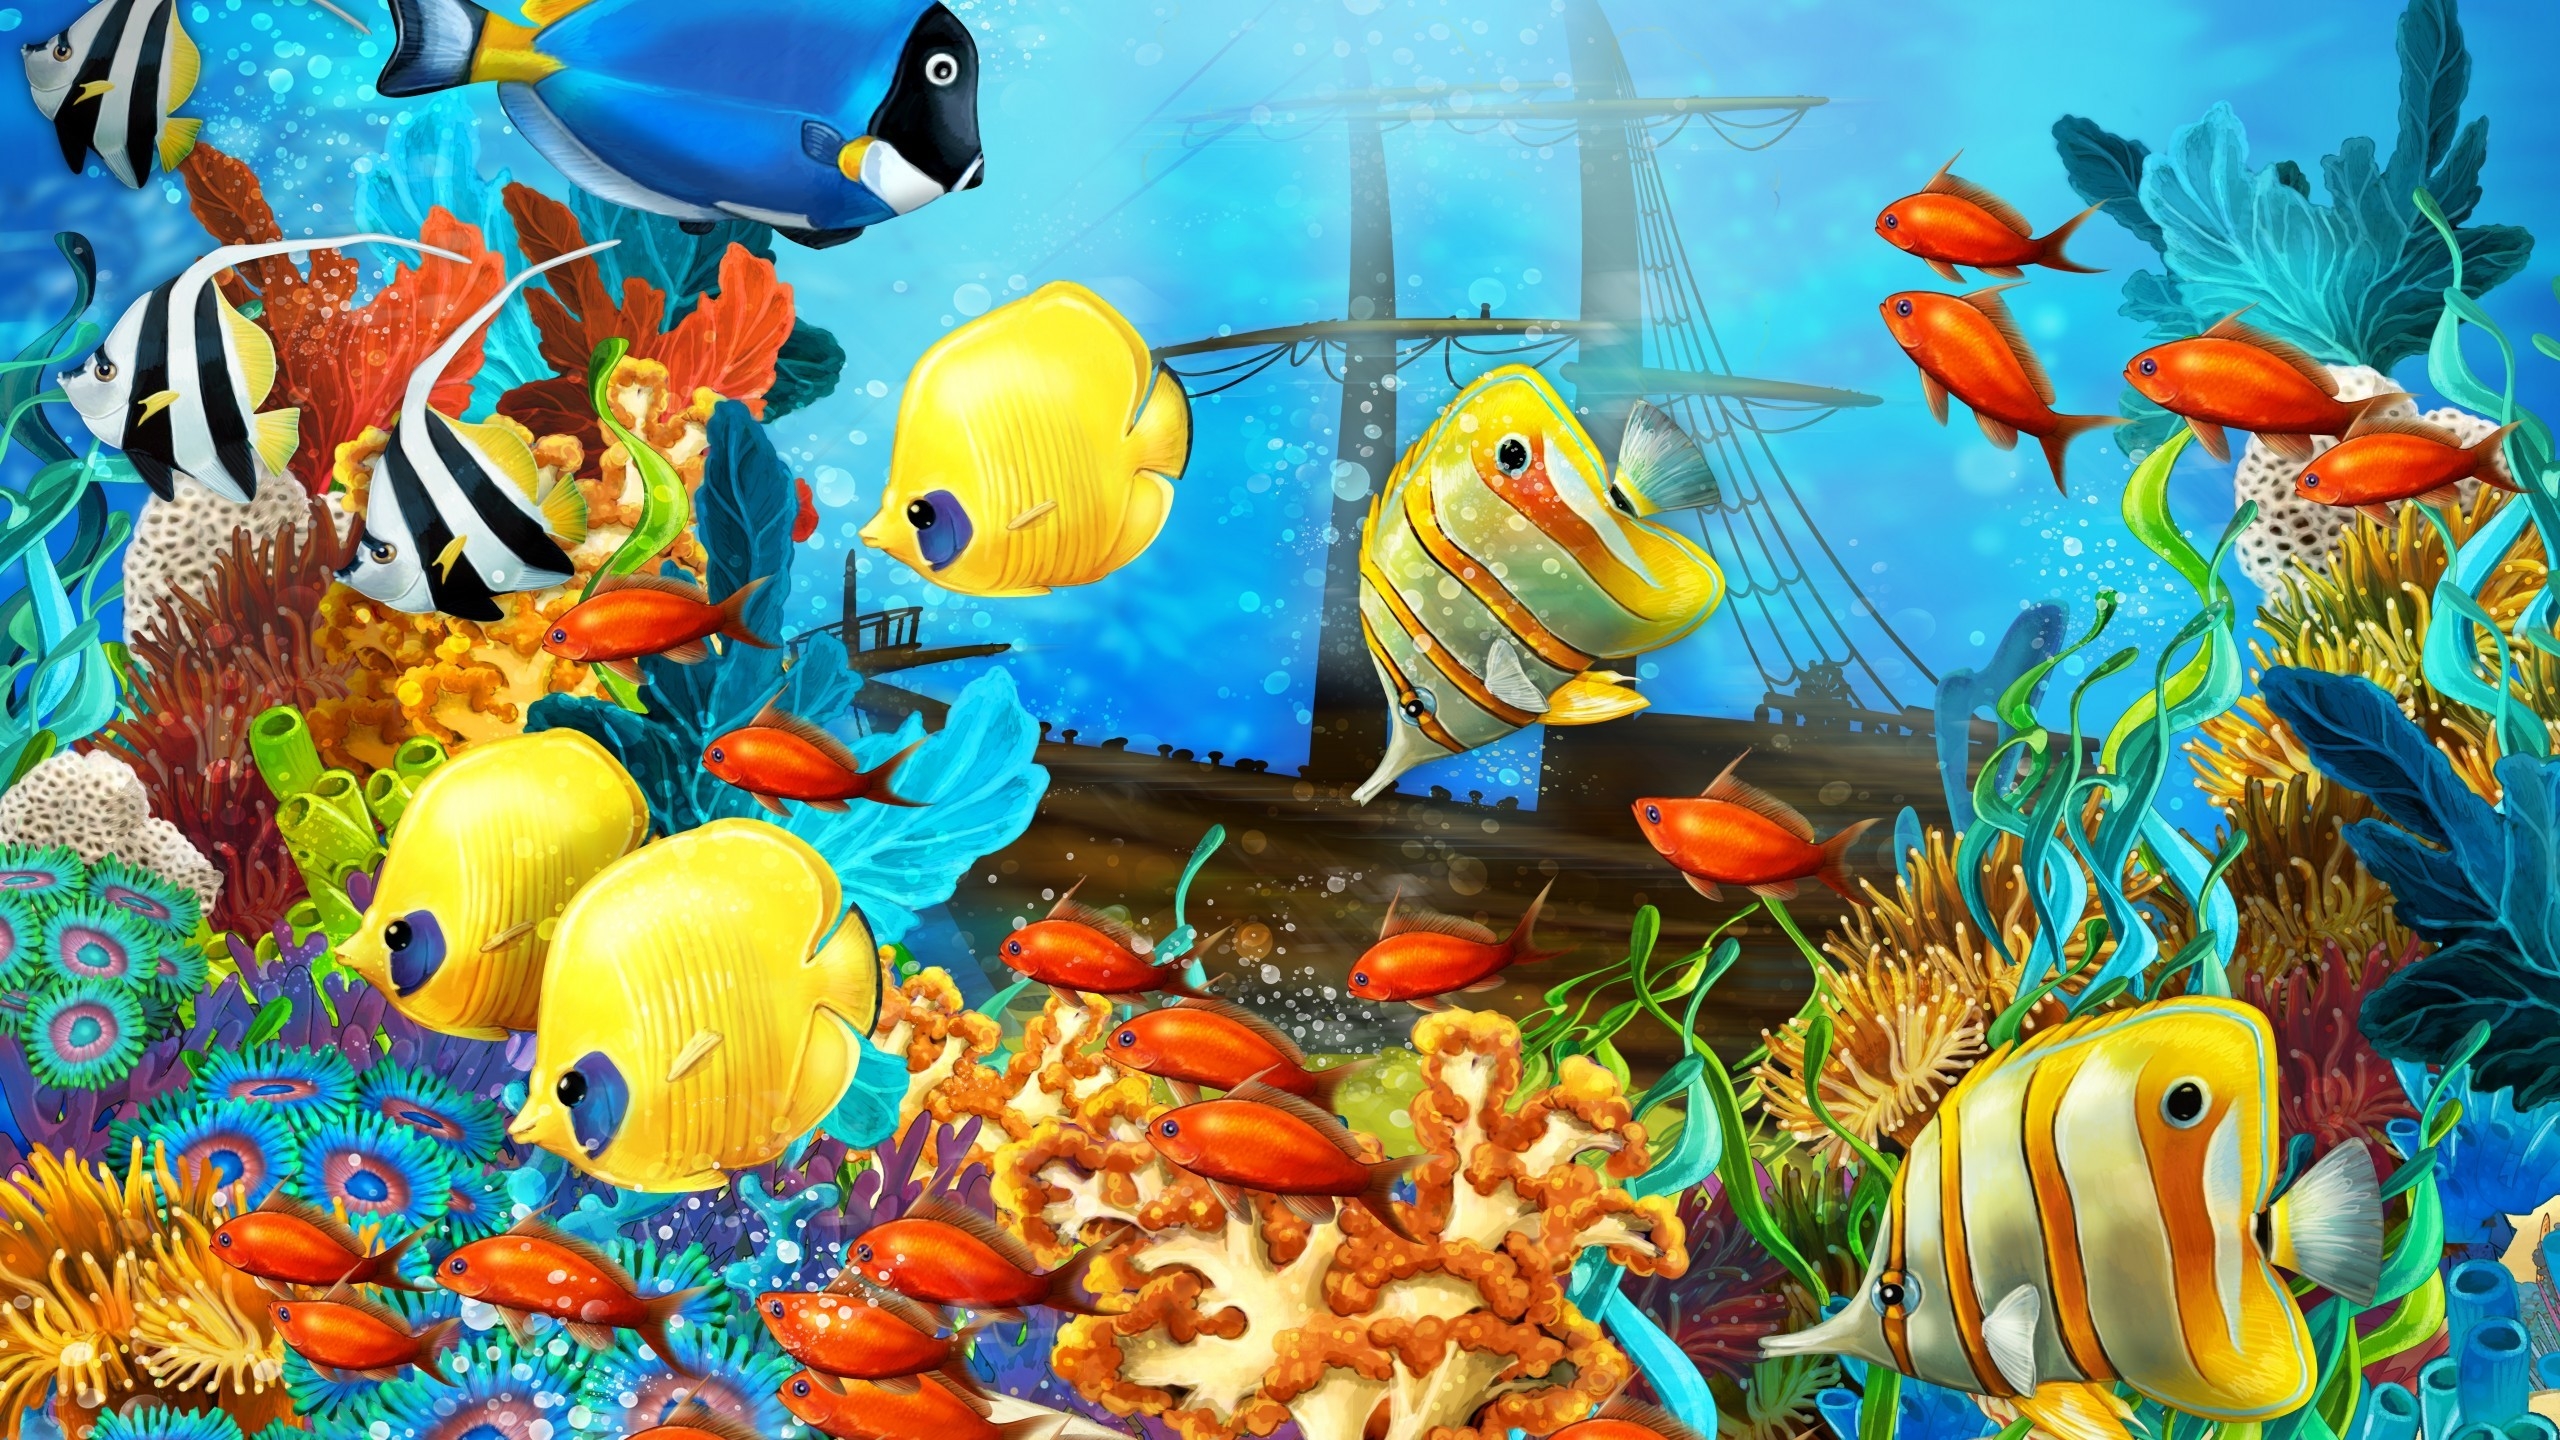 Fish World Painting for 2560x1440 HDTV resolution